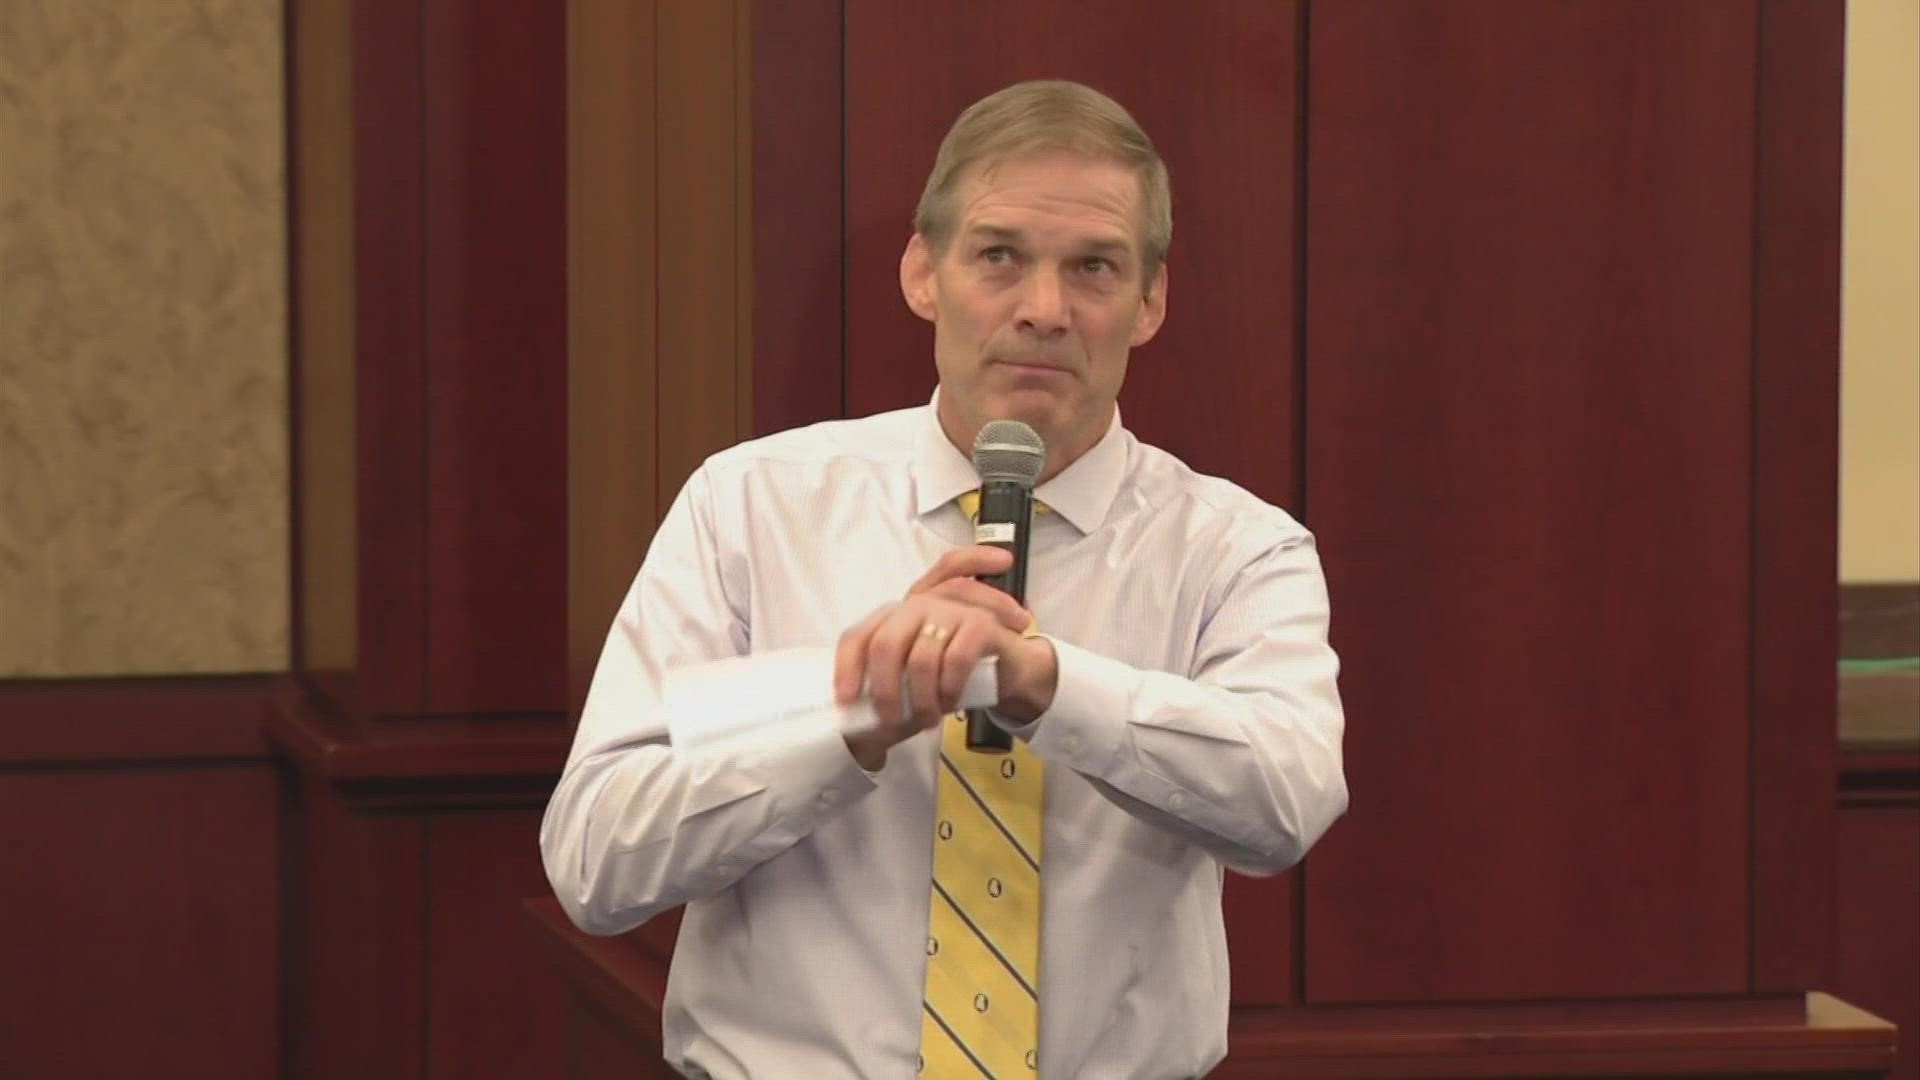 House investigators have issued subpoenas for Rep. Jim Jordan and four other GOP lawmakers as part of their probe into the Jan. 6 insurrection.